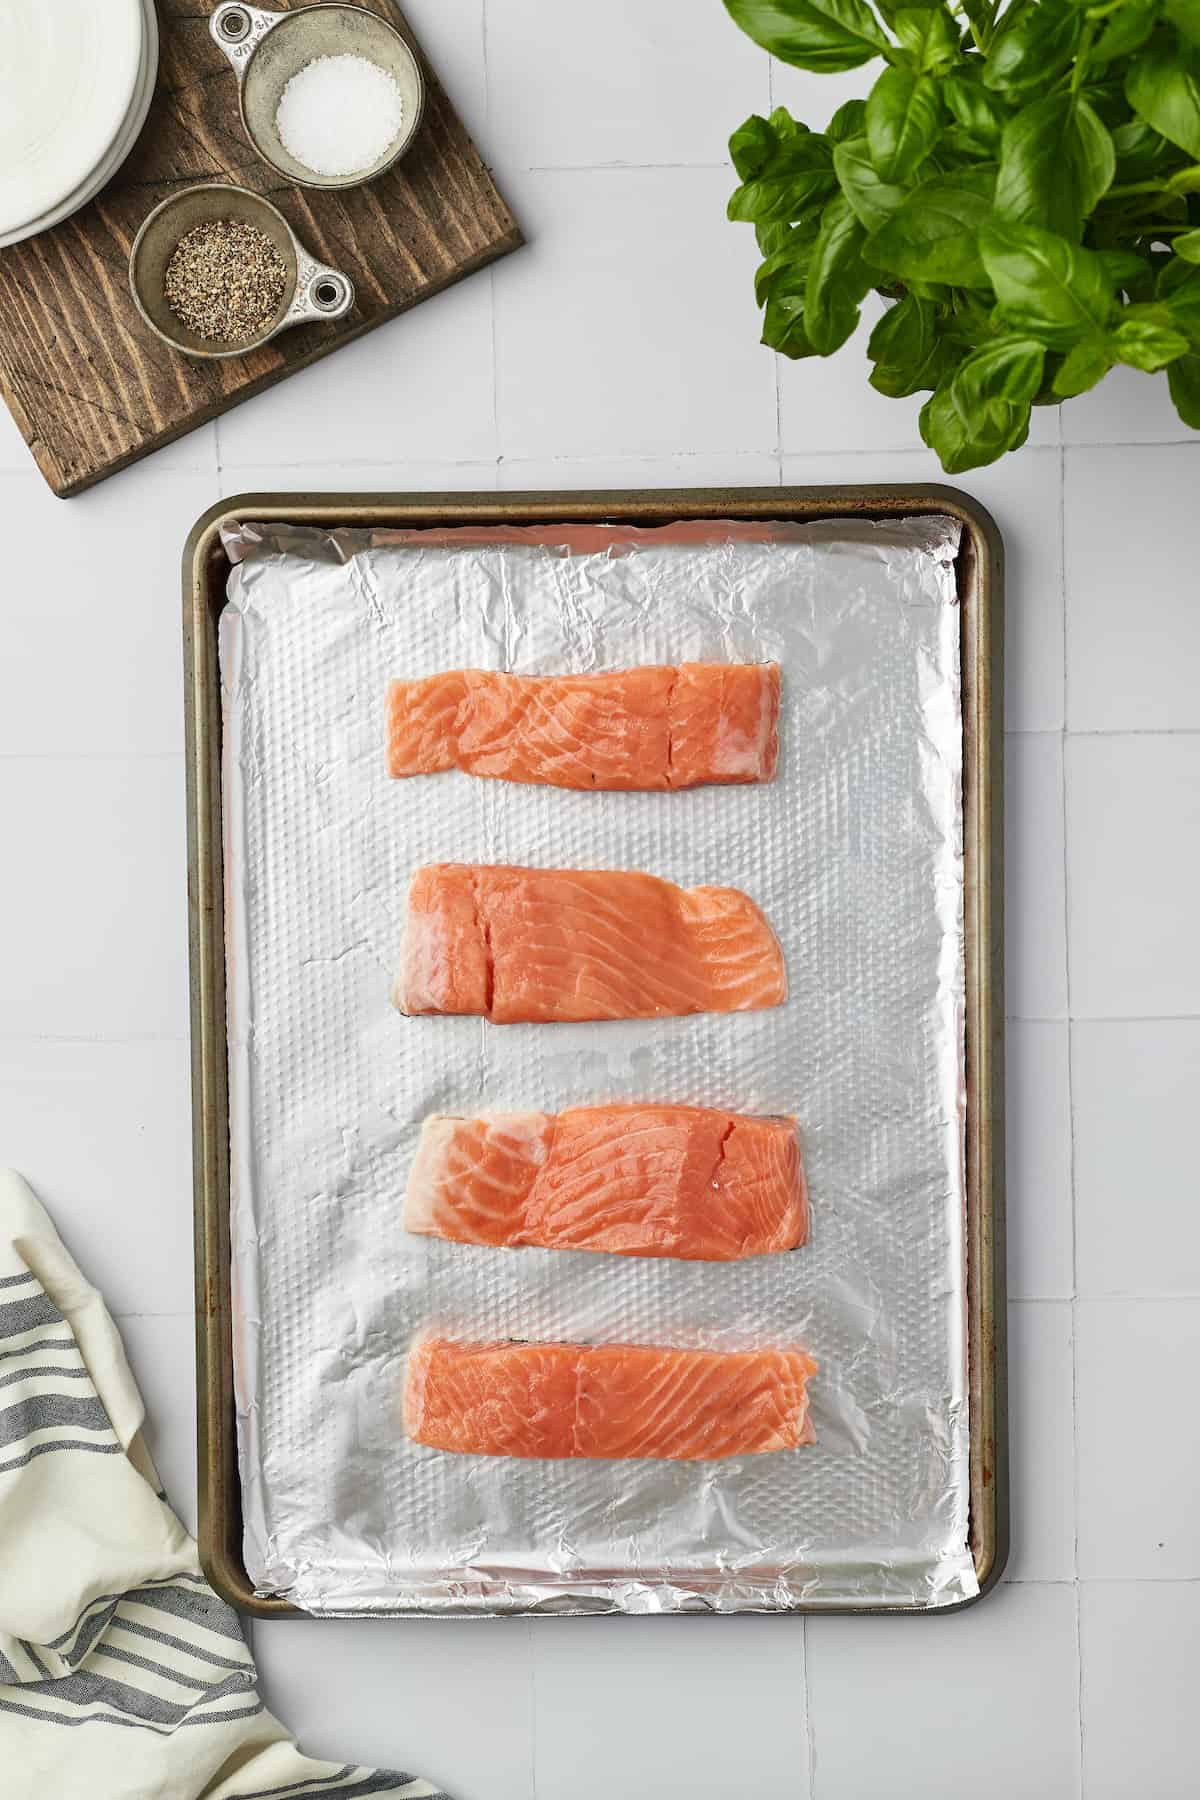 Overhead view of uncooked salmon fillets on sheet pan